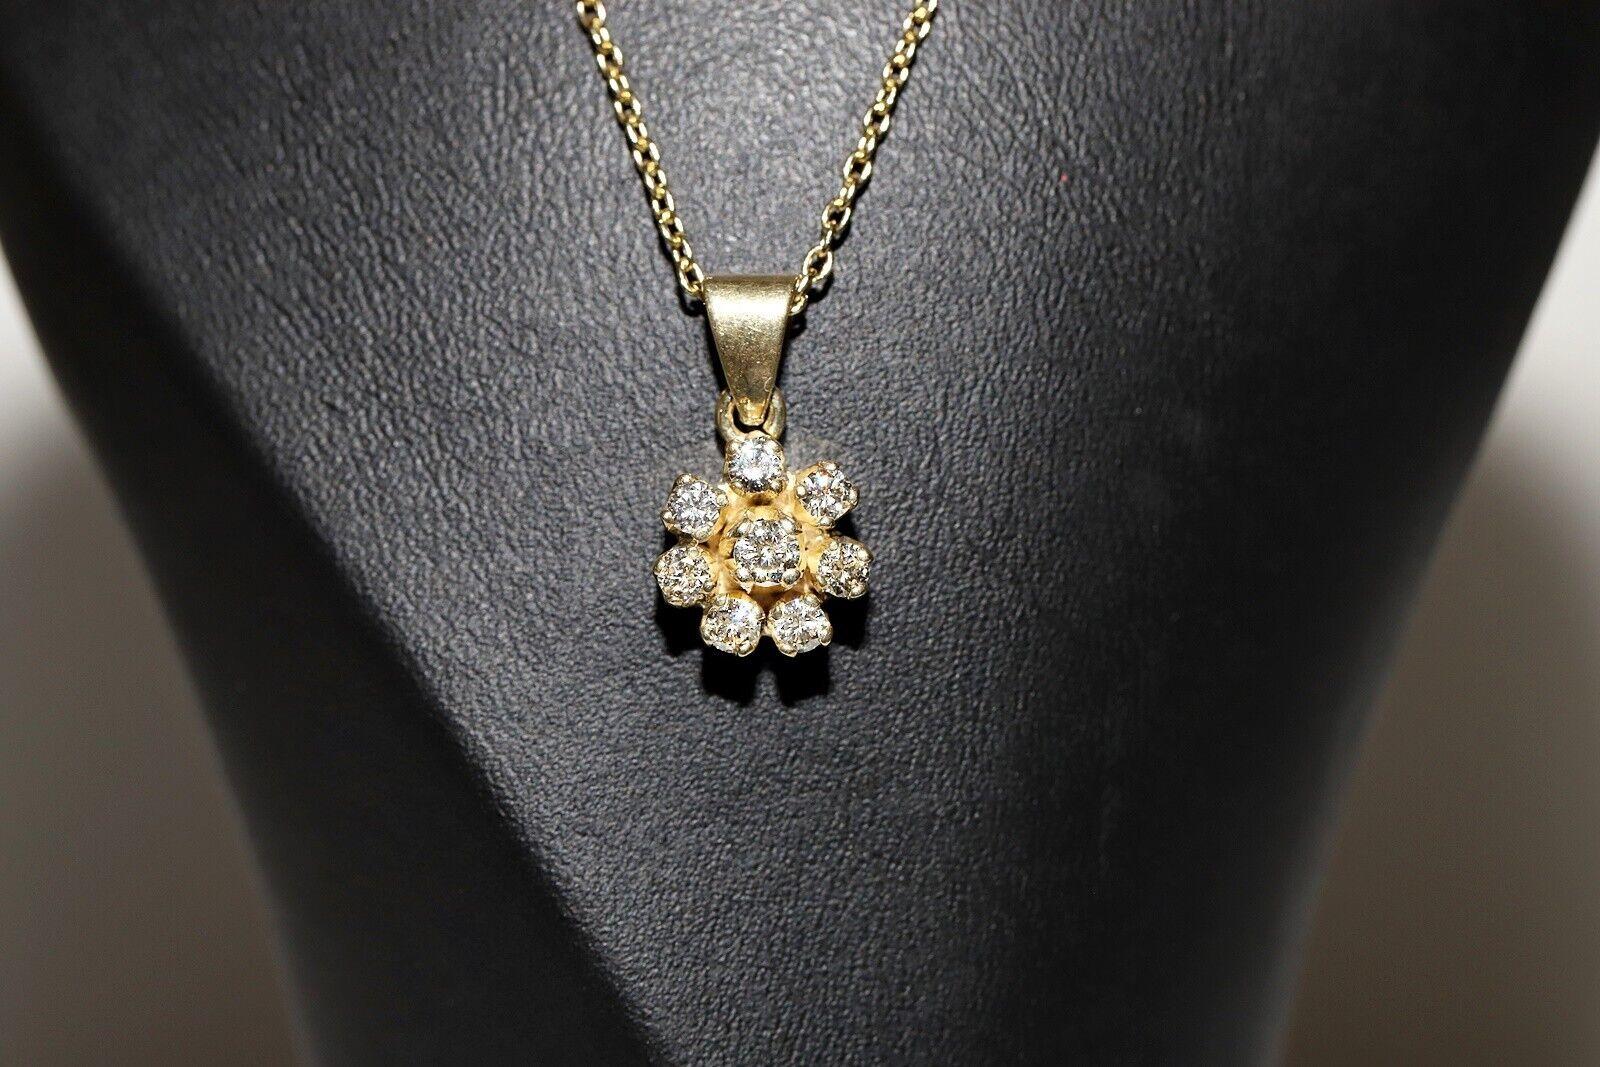 In very good condition.
Total weight is 5.4 grams.
Totally is diamond about 0.50 carat.
The diamond is has G-H color and vvs-vs.
Total lenght is chain 42 cm.
Please contact for any questions.